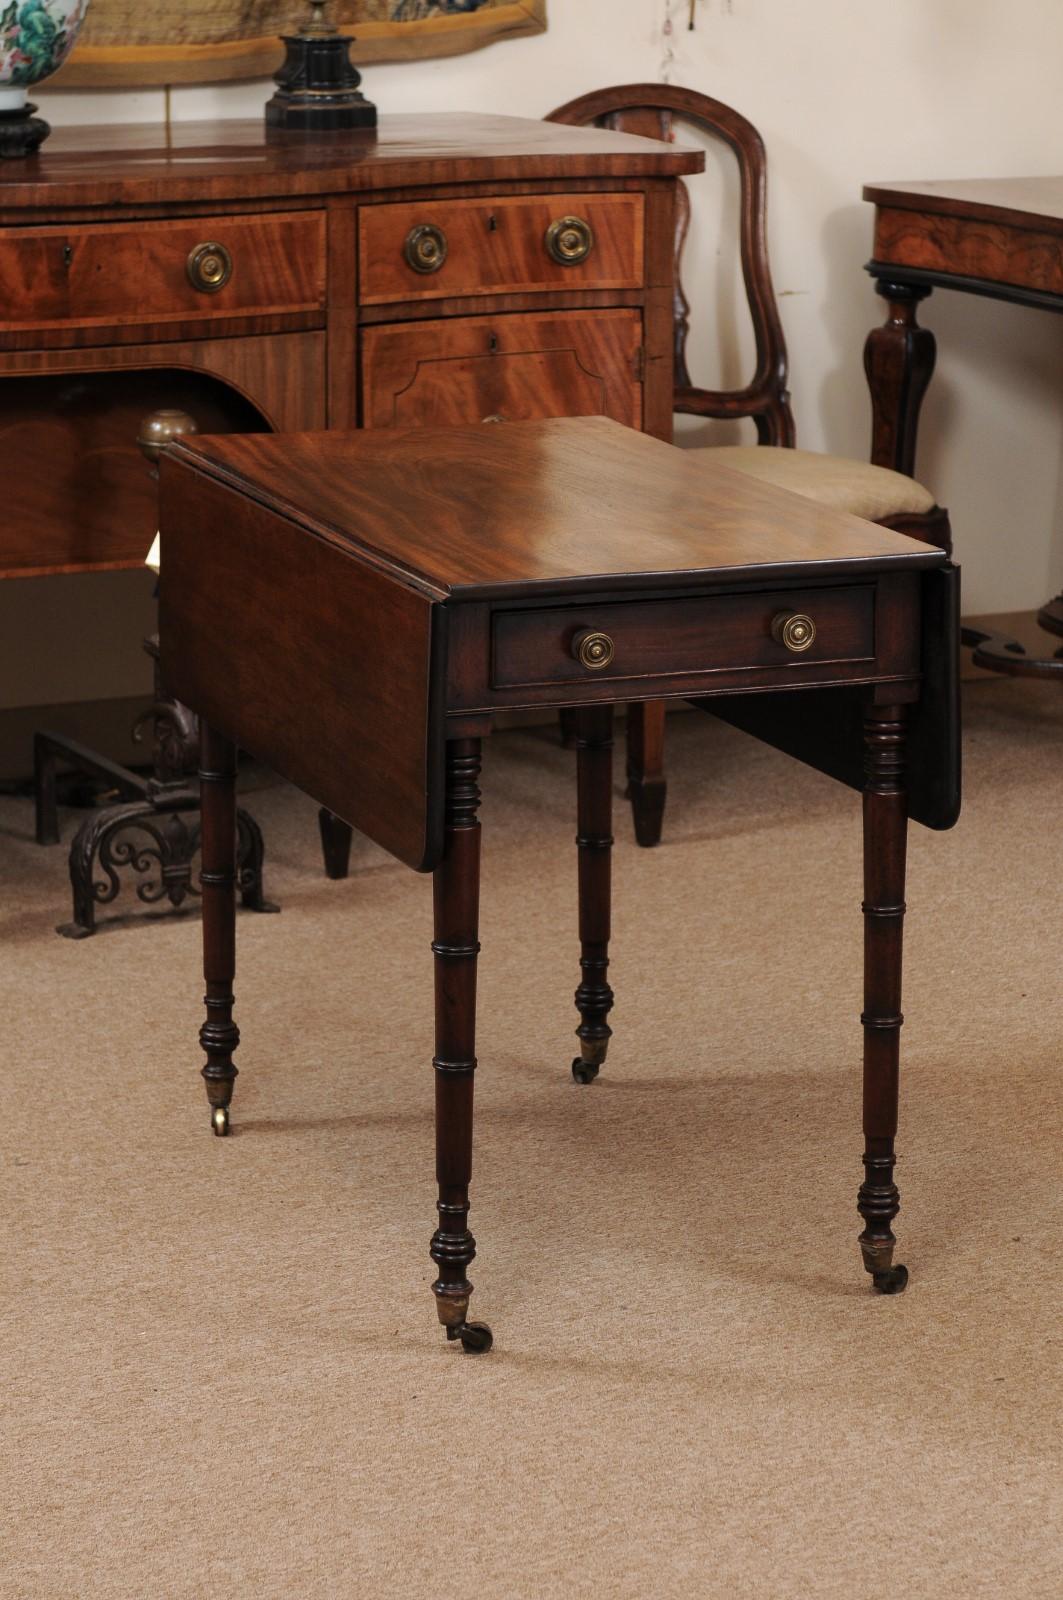 An English George III figured mahogany pembroke table featuring one drawer with brass pulls, turned legs ending on brass castor feet, ca. 1800. 

The dimension are 39.5